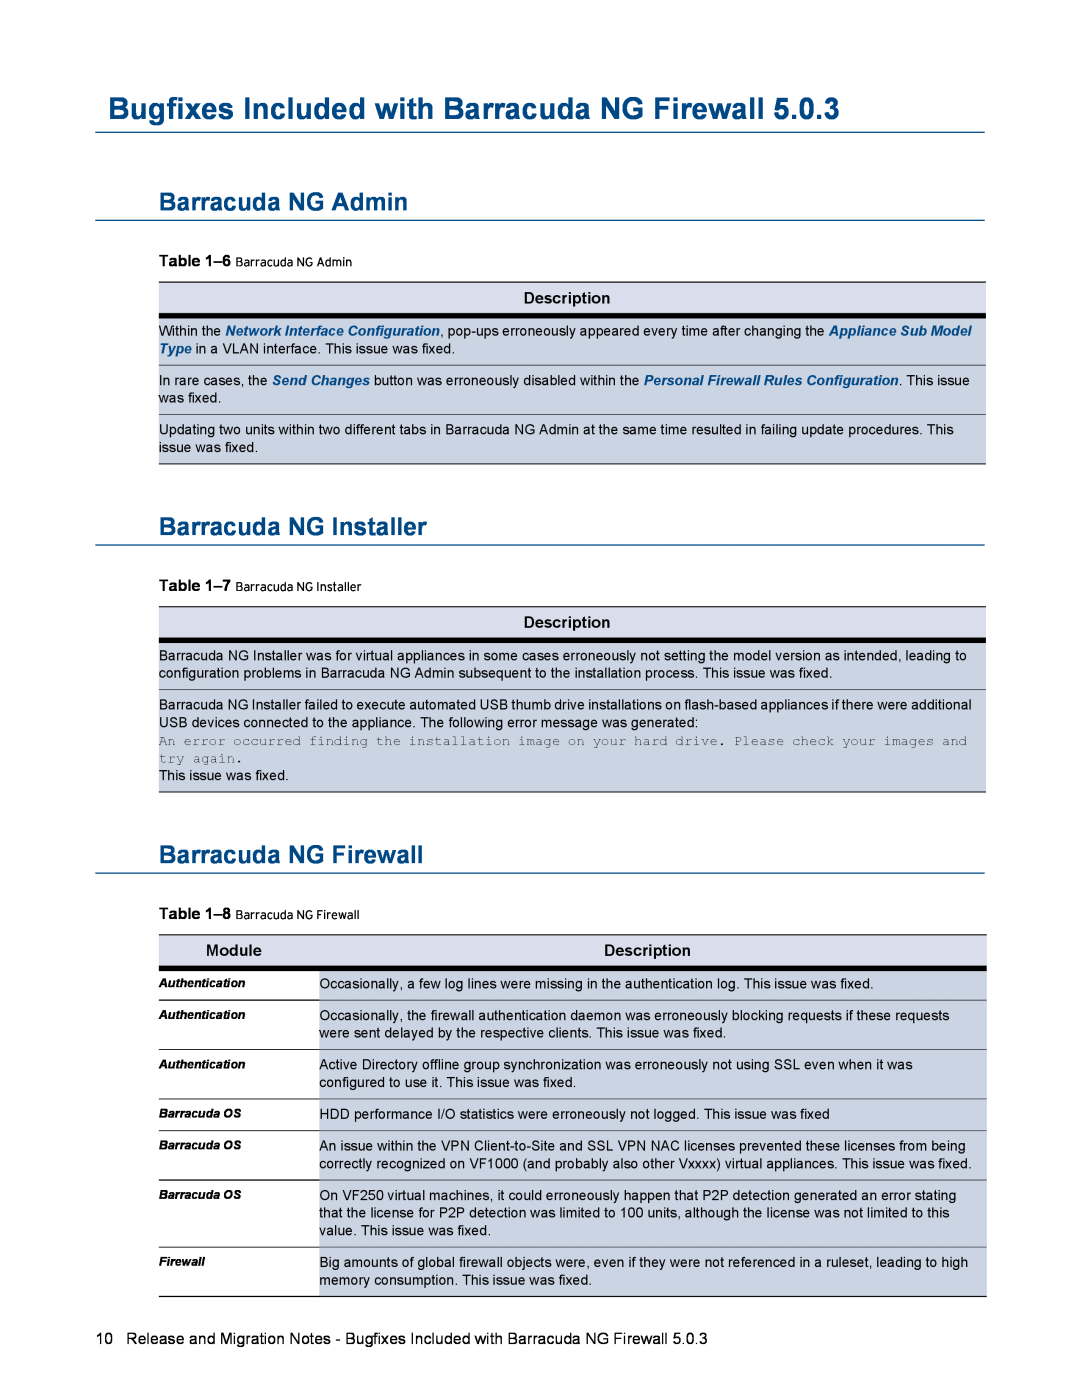 Barracuda Networks 5.0.3 manual Bugfixes Included with Barracuda NG Firewall, Description, Module 